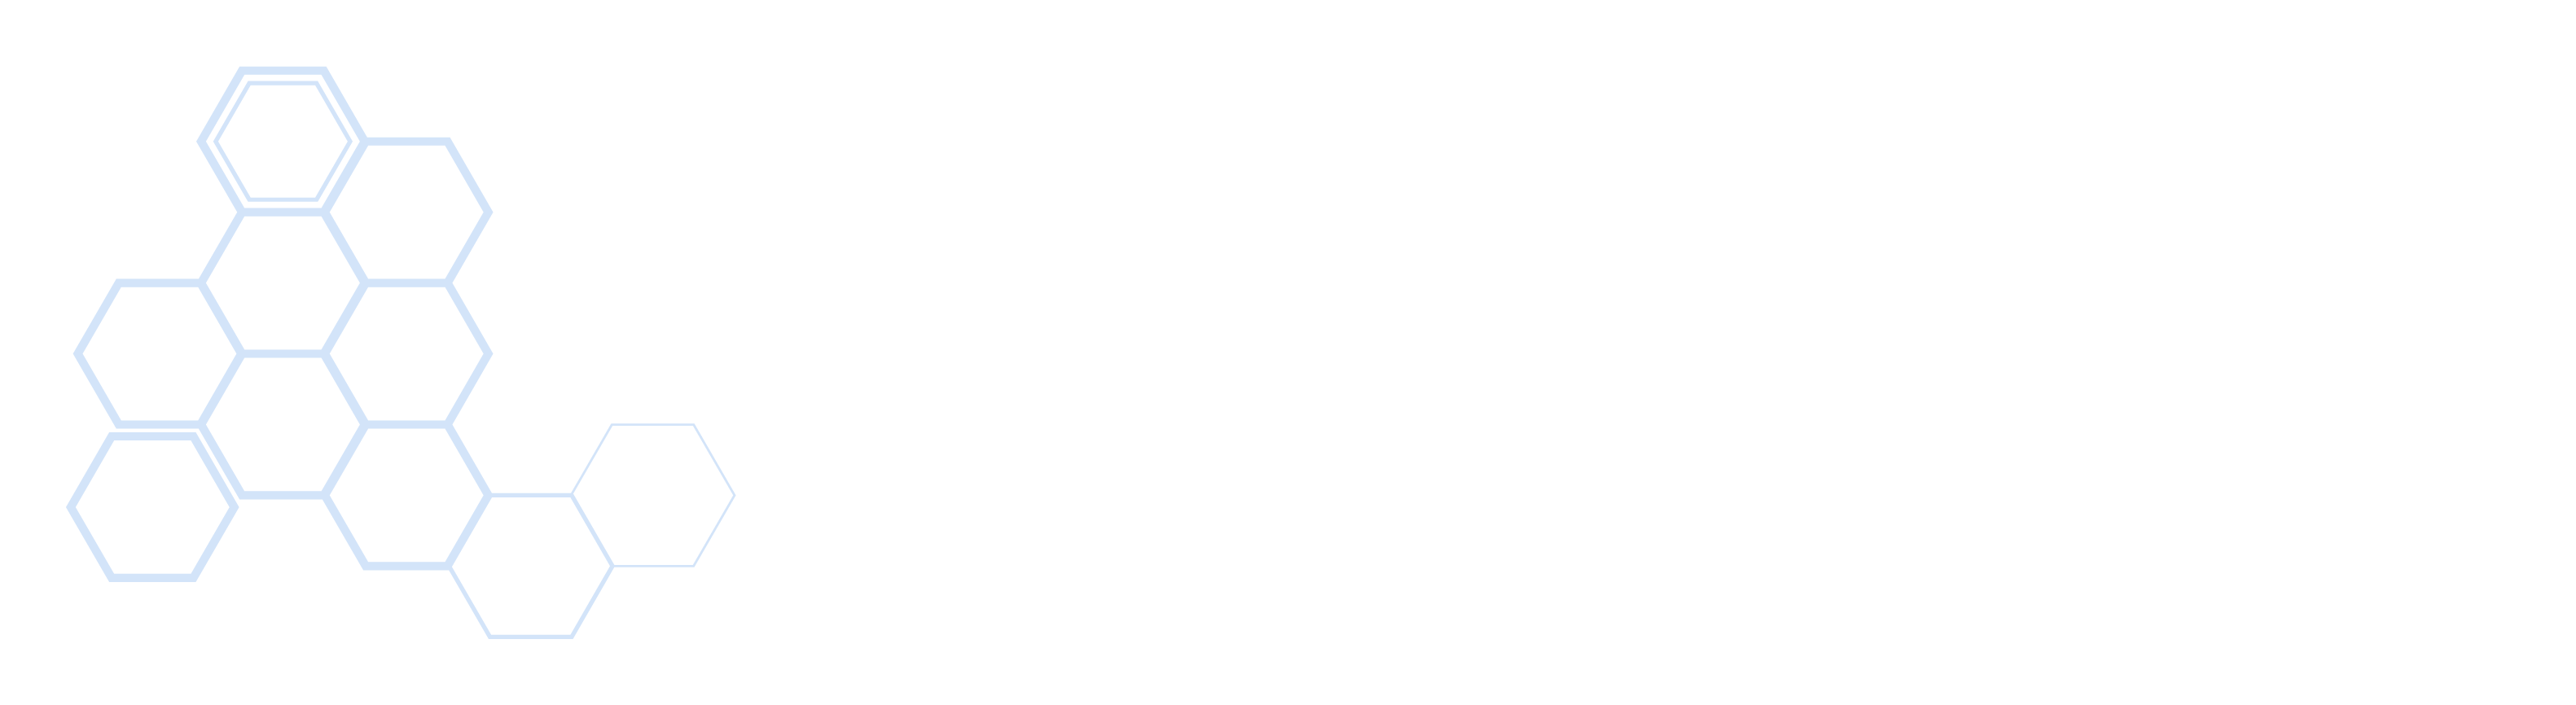 Secure Hive